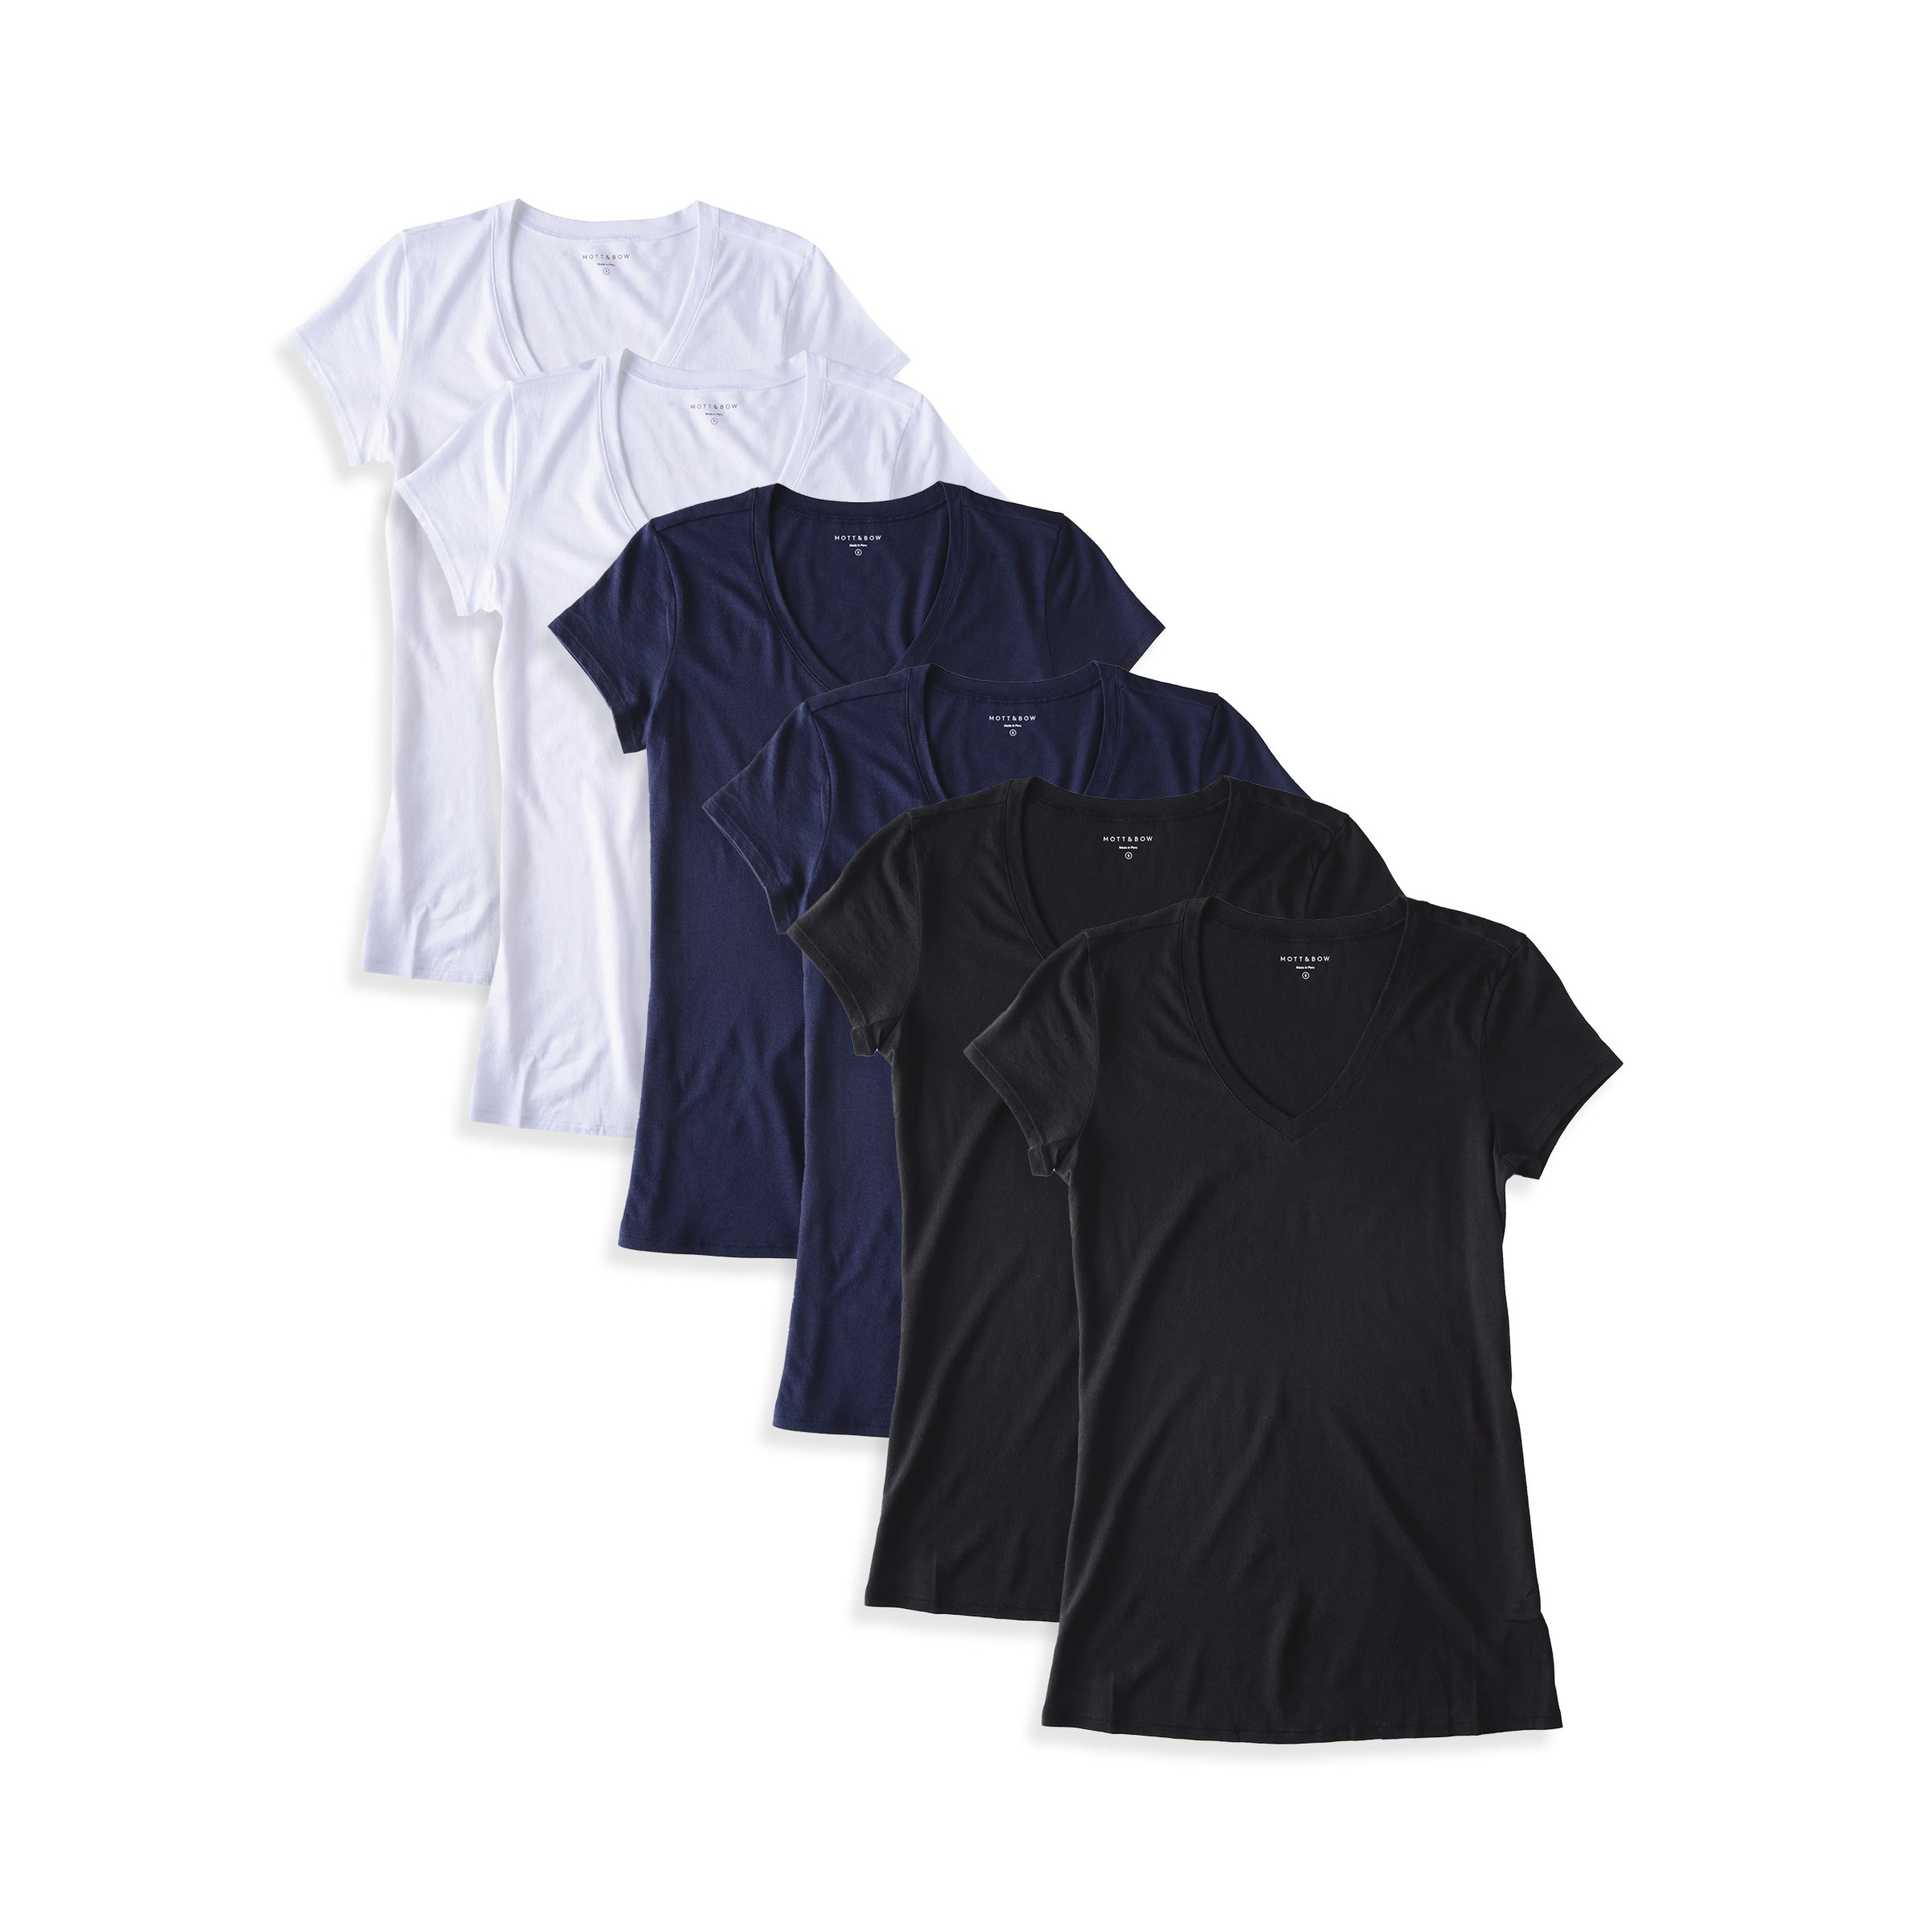  wearing Black/Navy/White Fitted V-Neck Marcy 6-Pack